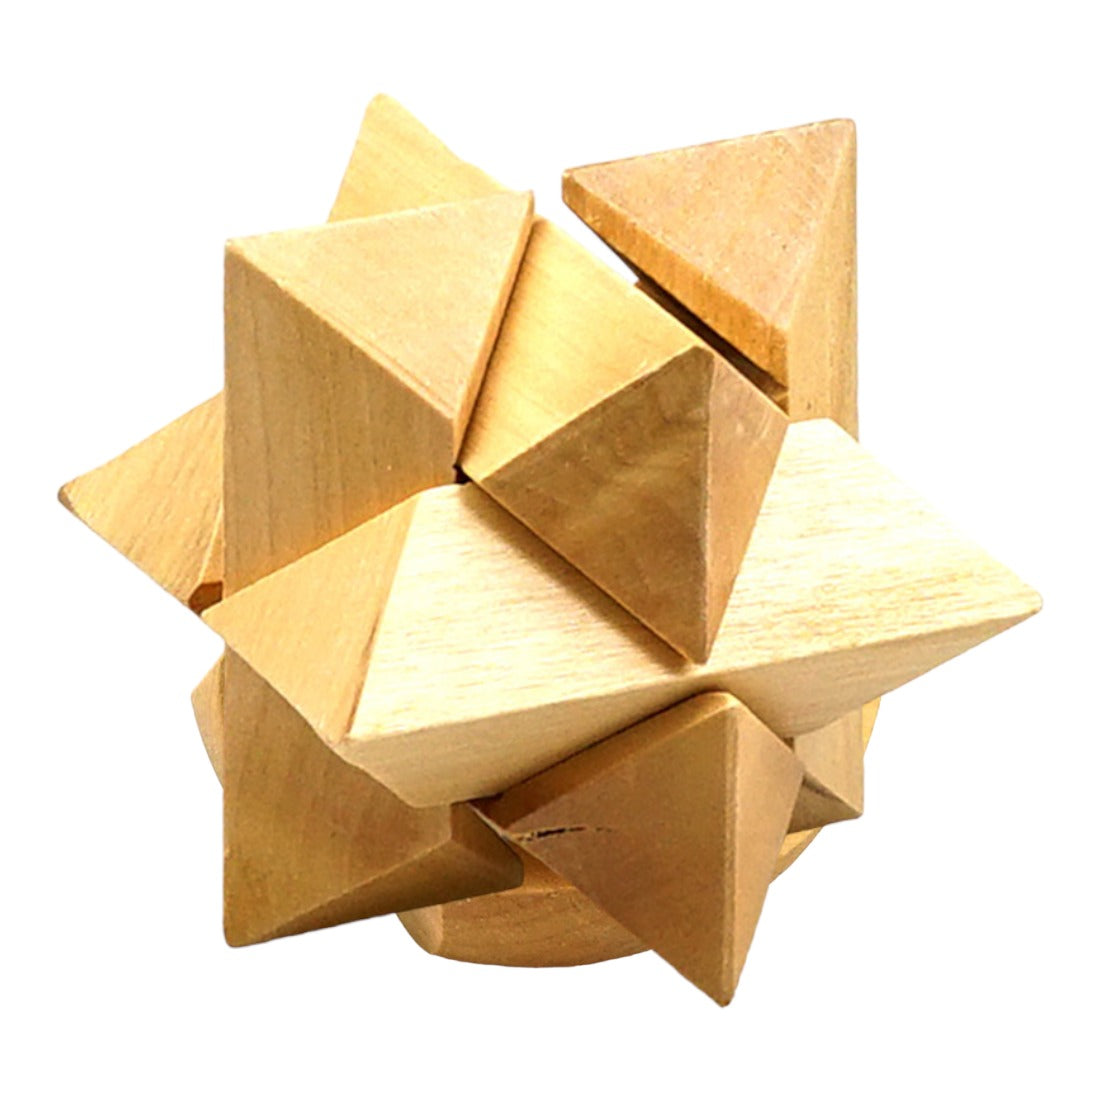 Carved Wood Block Puzzle Decor - Star - NEW523